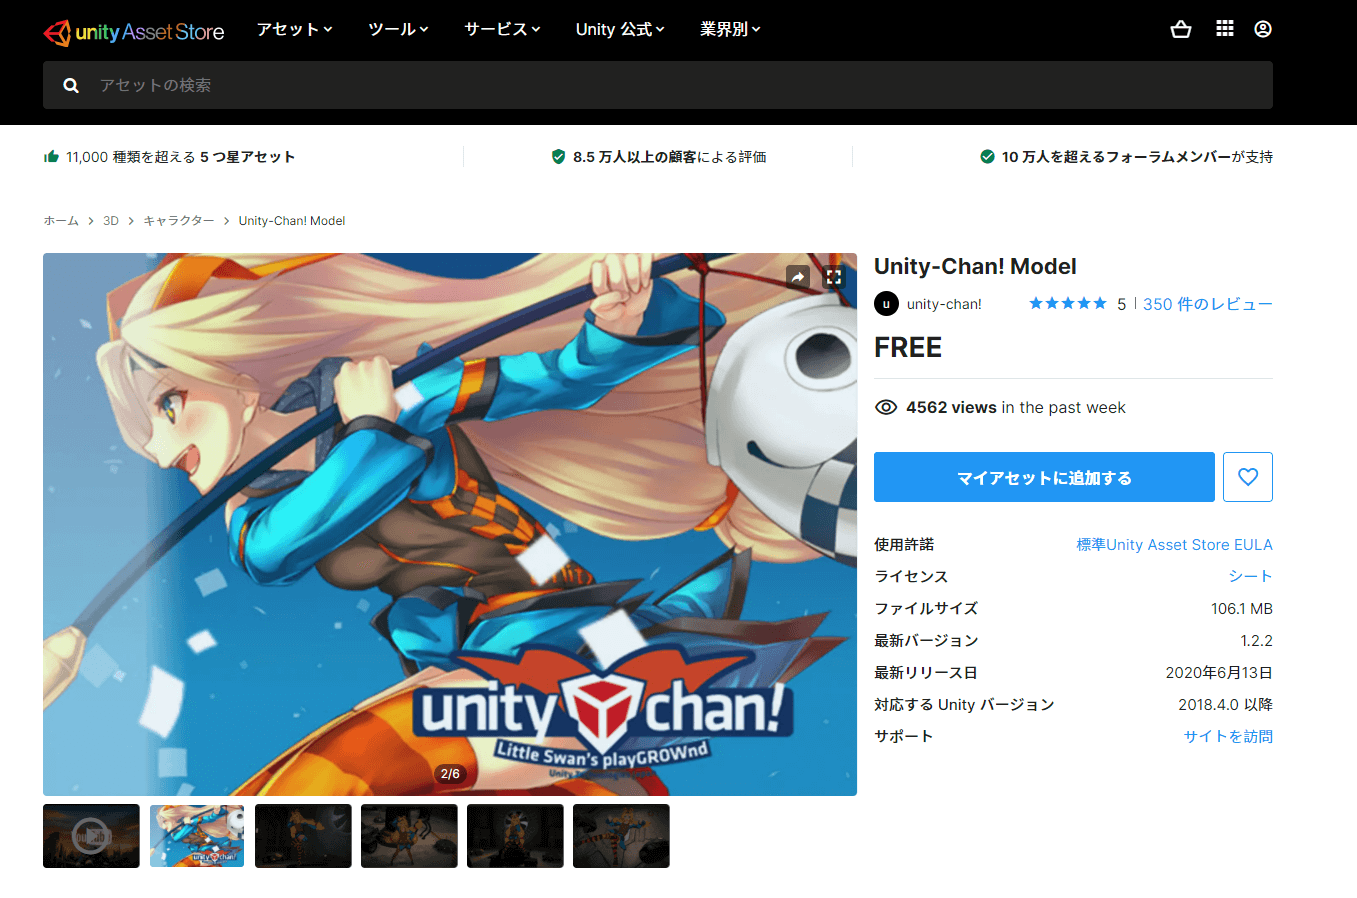 Unity-chan download page